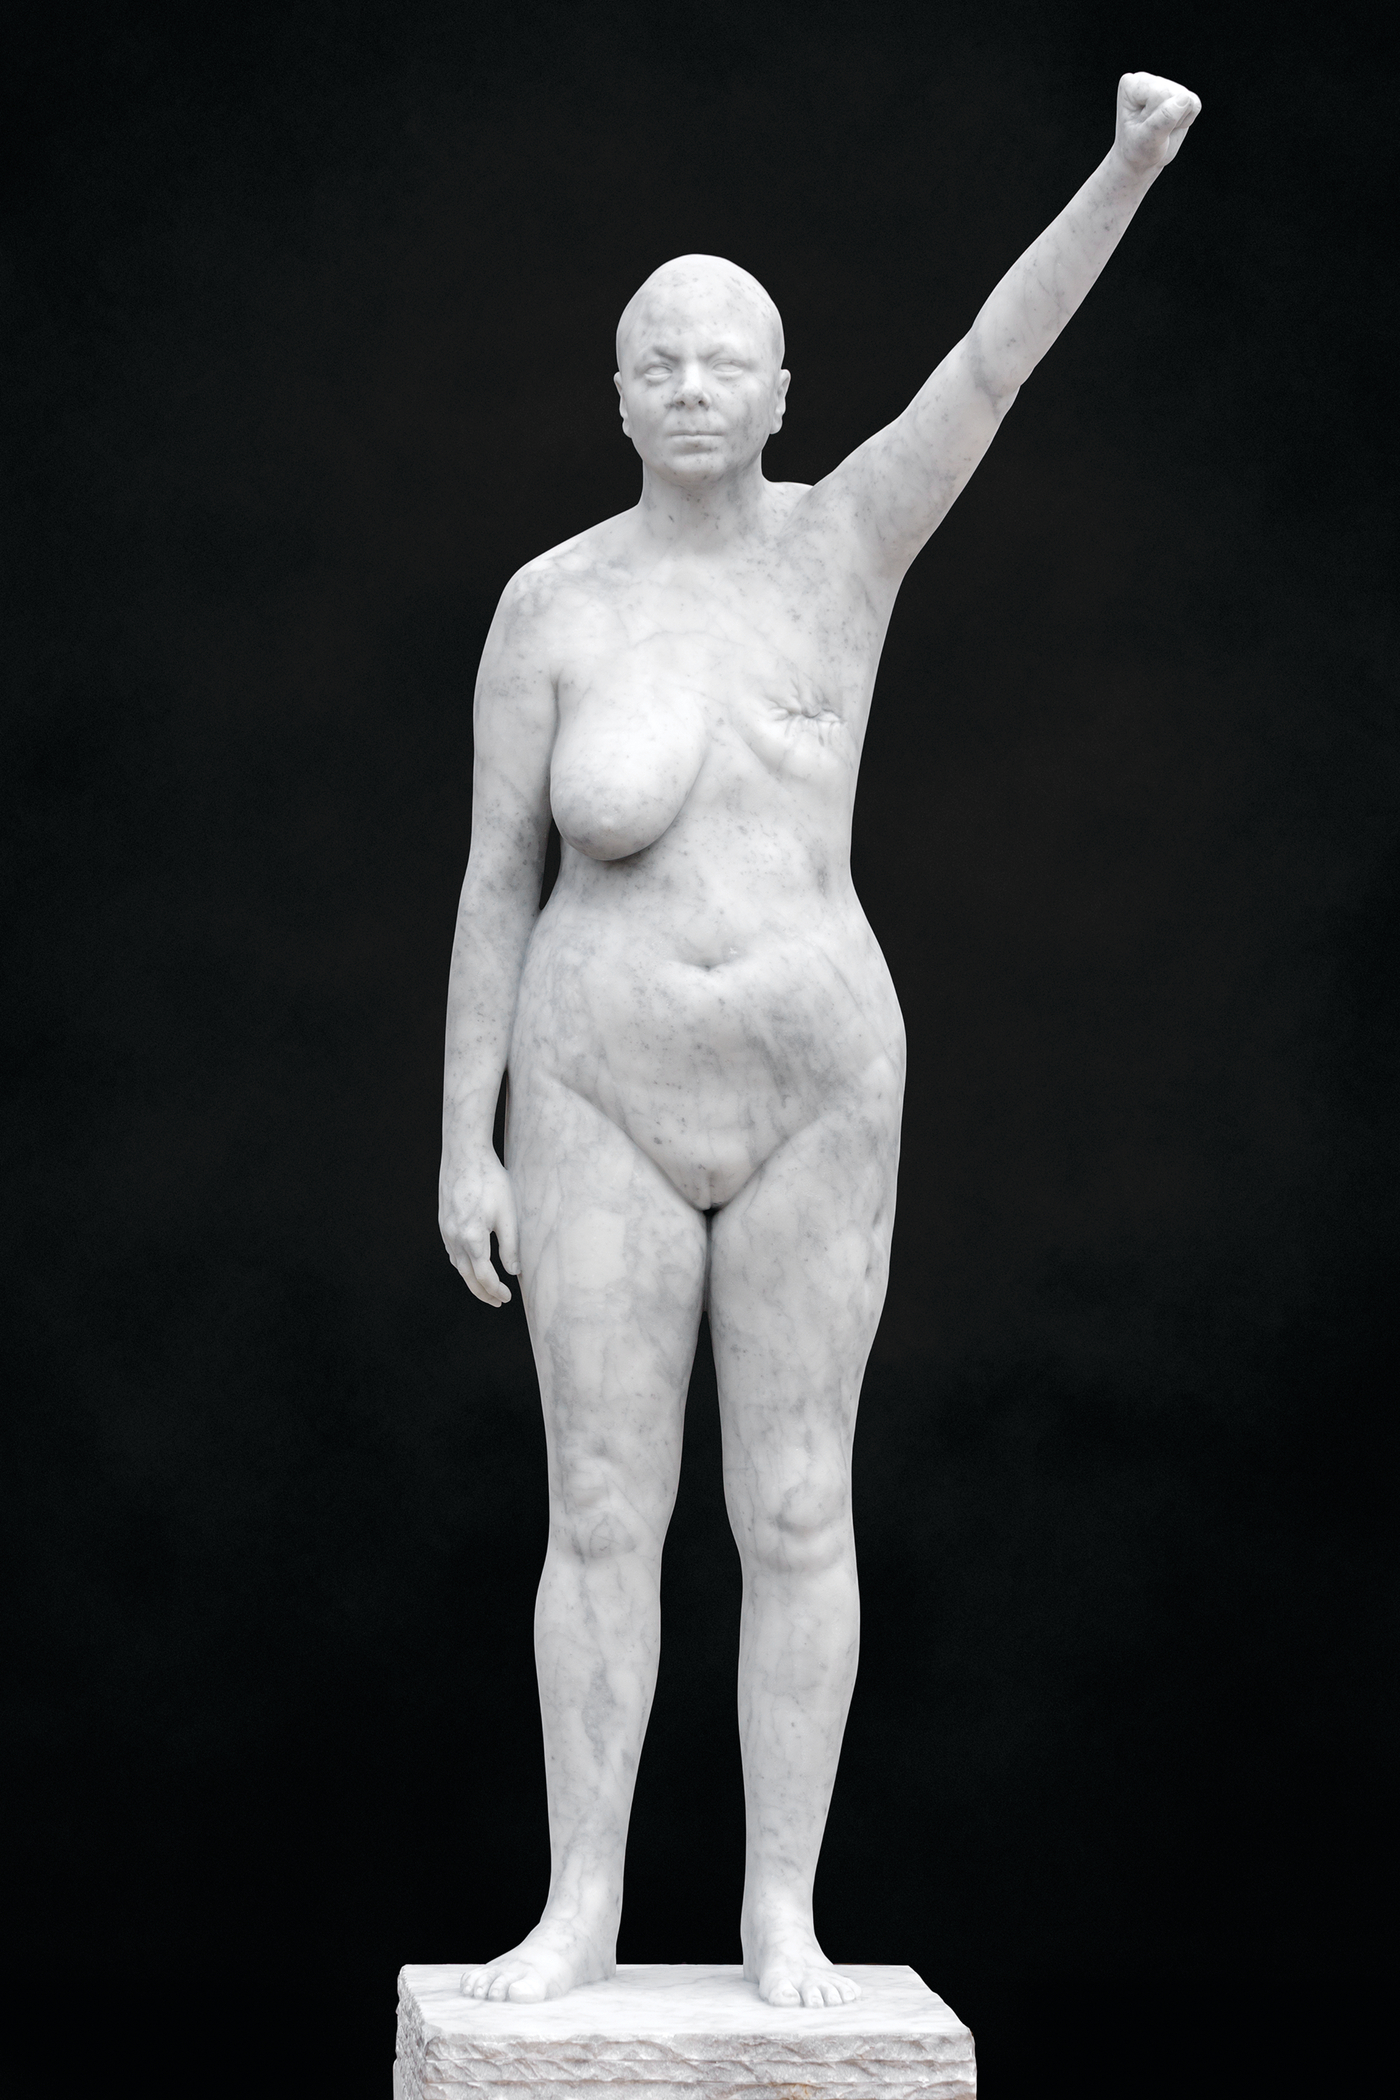 A nude life-size white marble statue of a figure stands on a platform. One fisted arm is raised above its head while the figure shows one breast surgically removed.